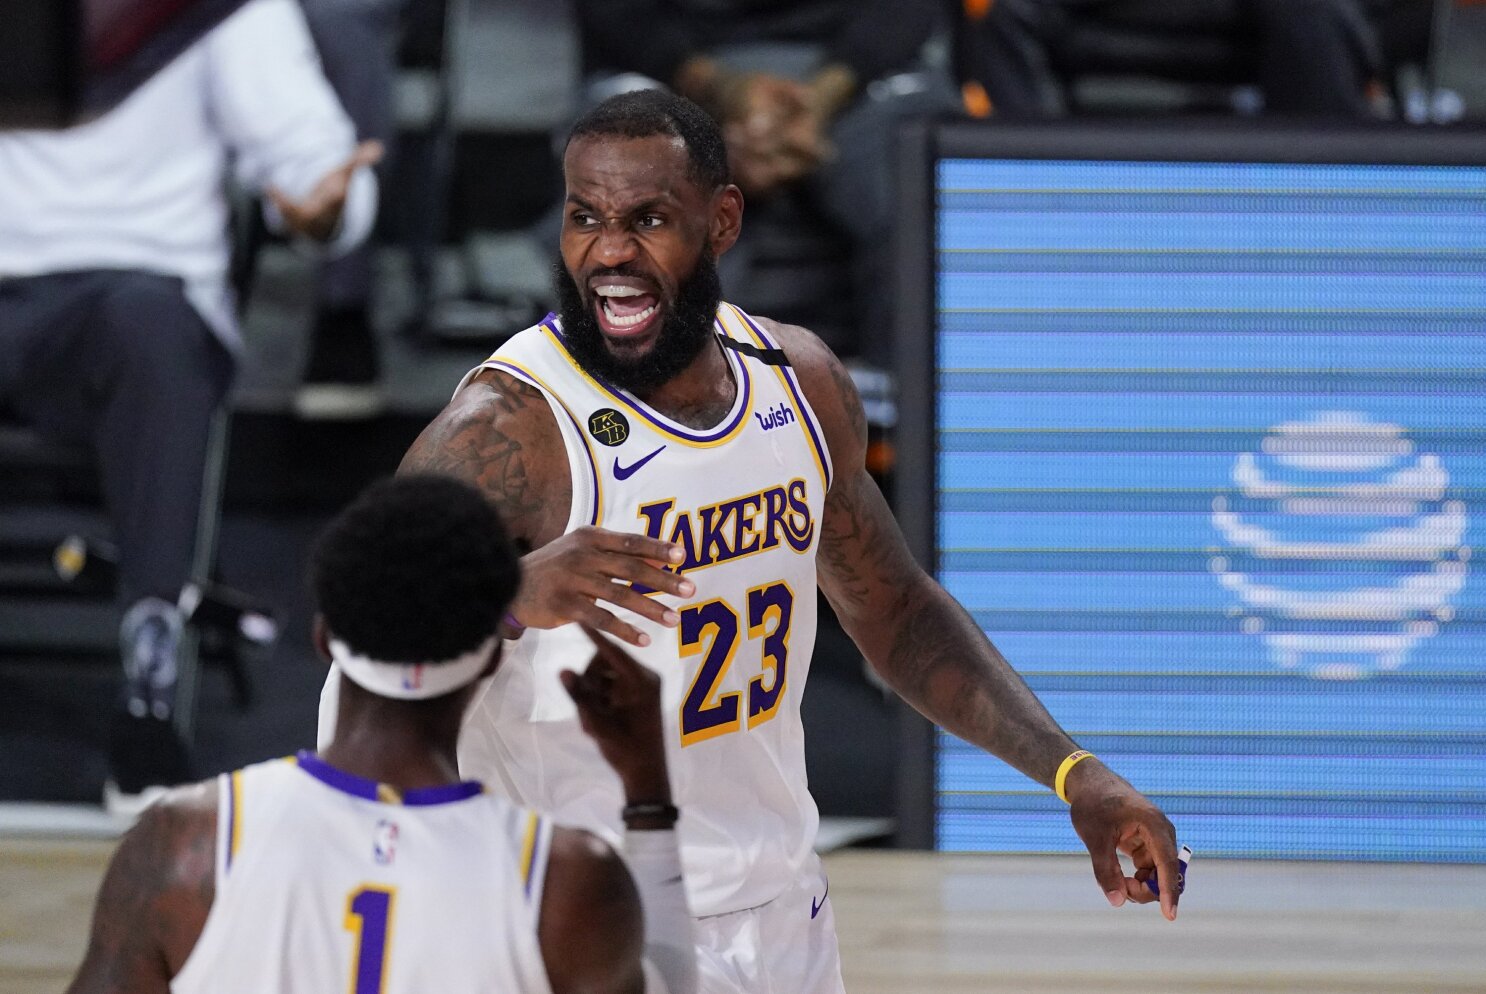 NBA cites two crucial no-calls late in Rockets' win against Lakers